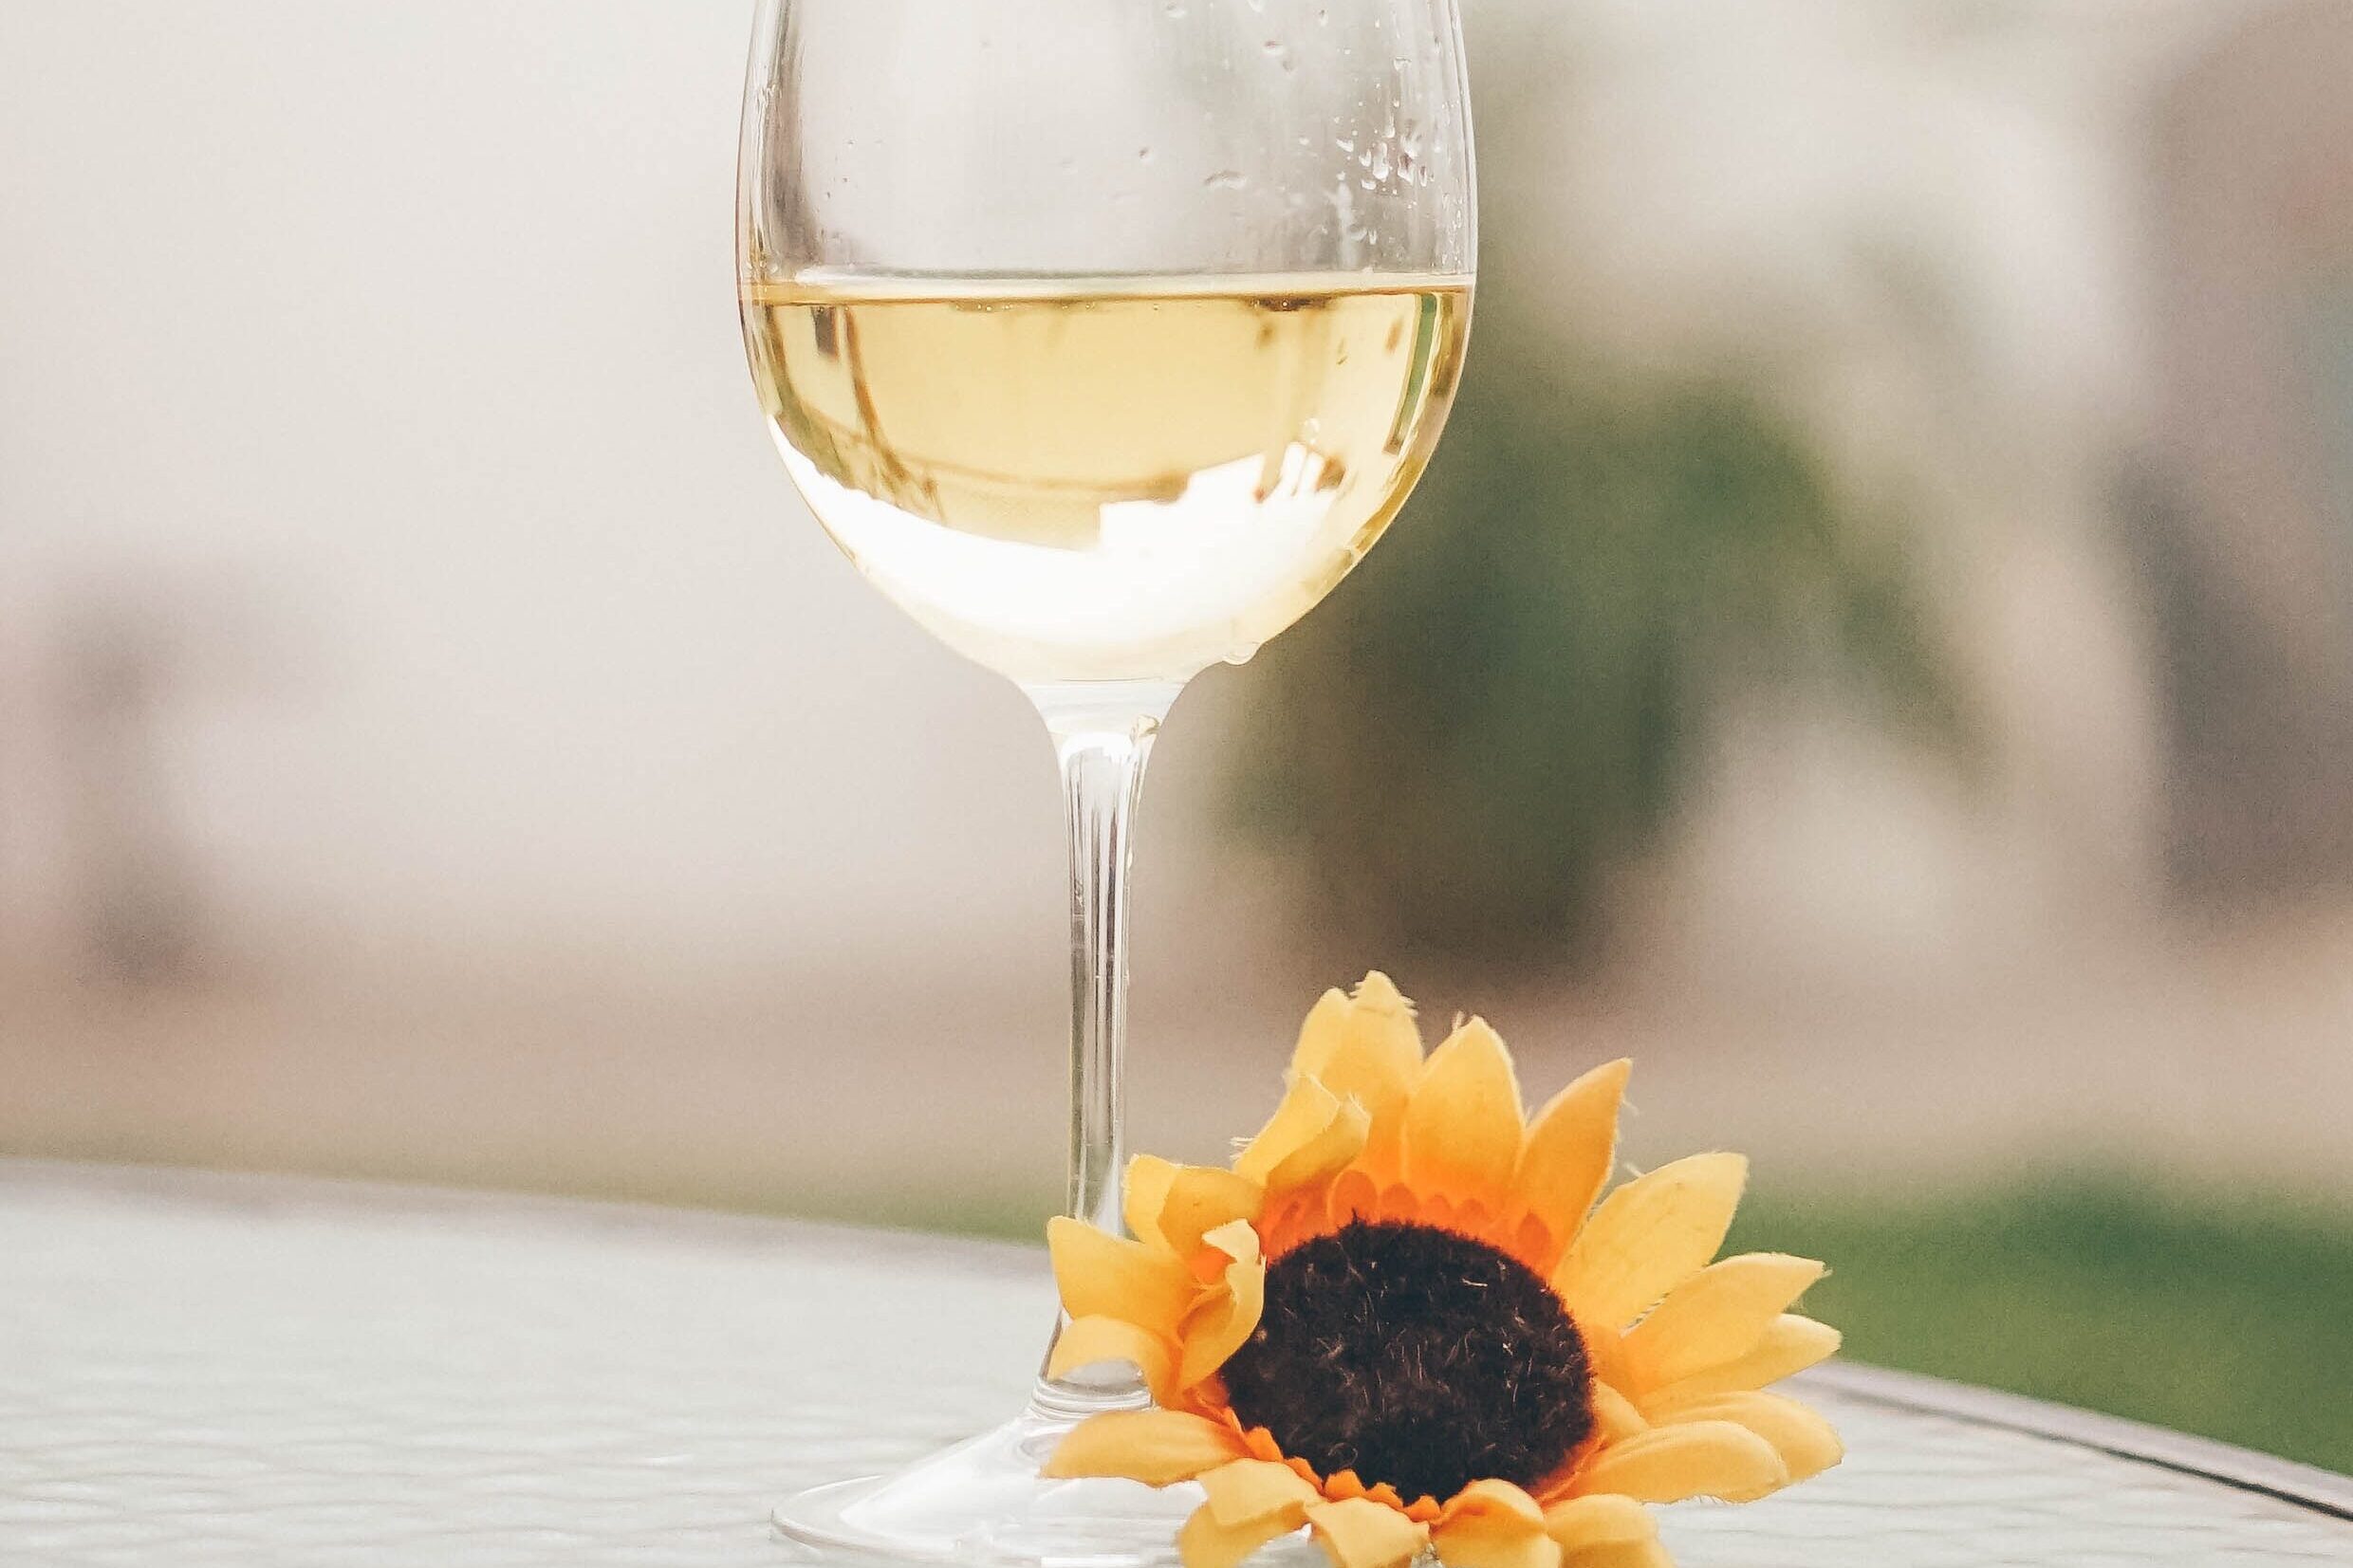 A glass of white wine next to a sunflower.